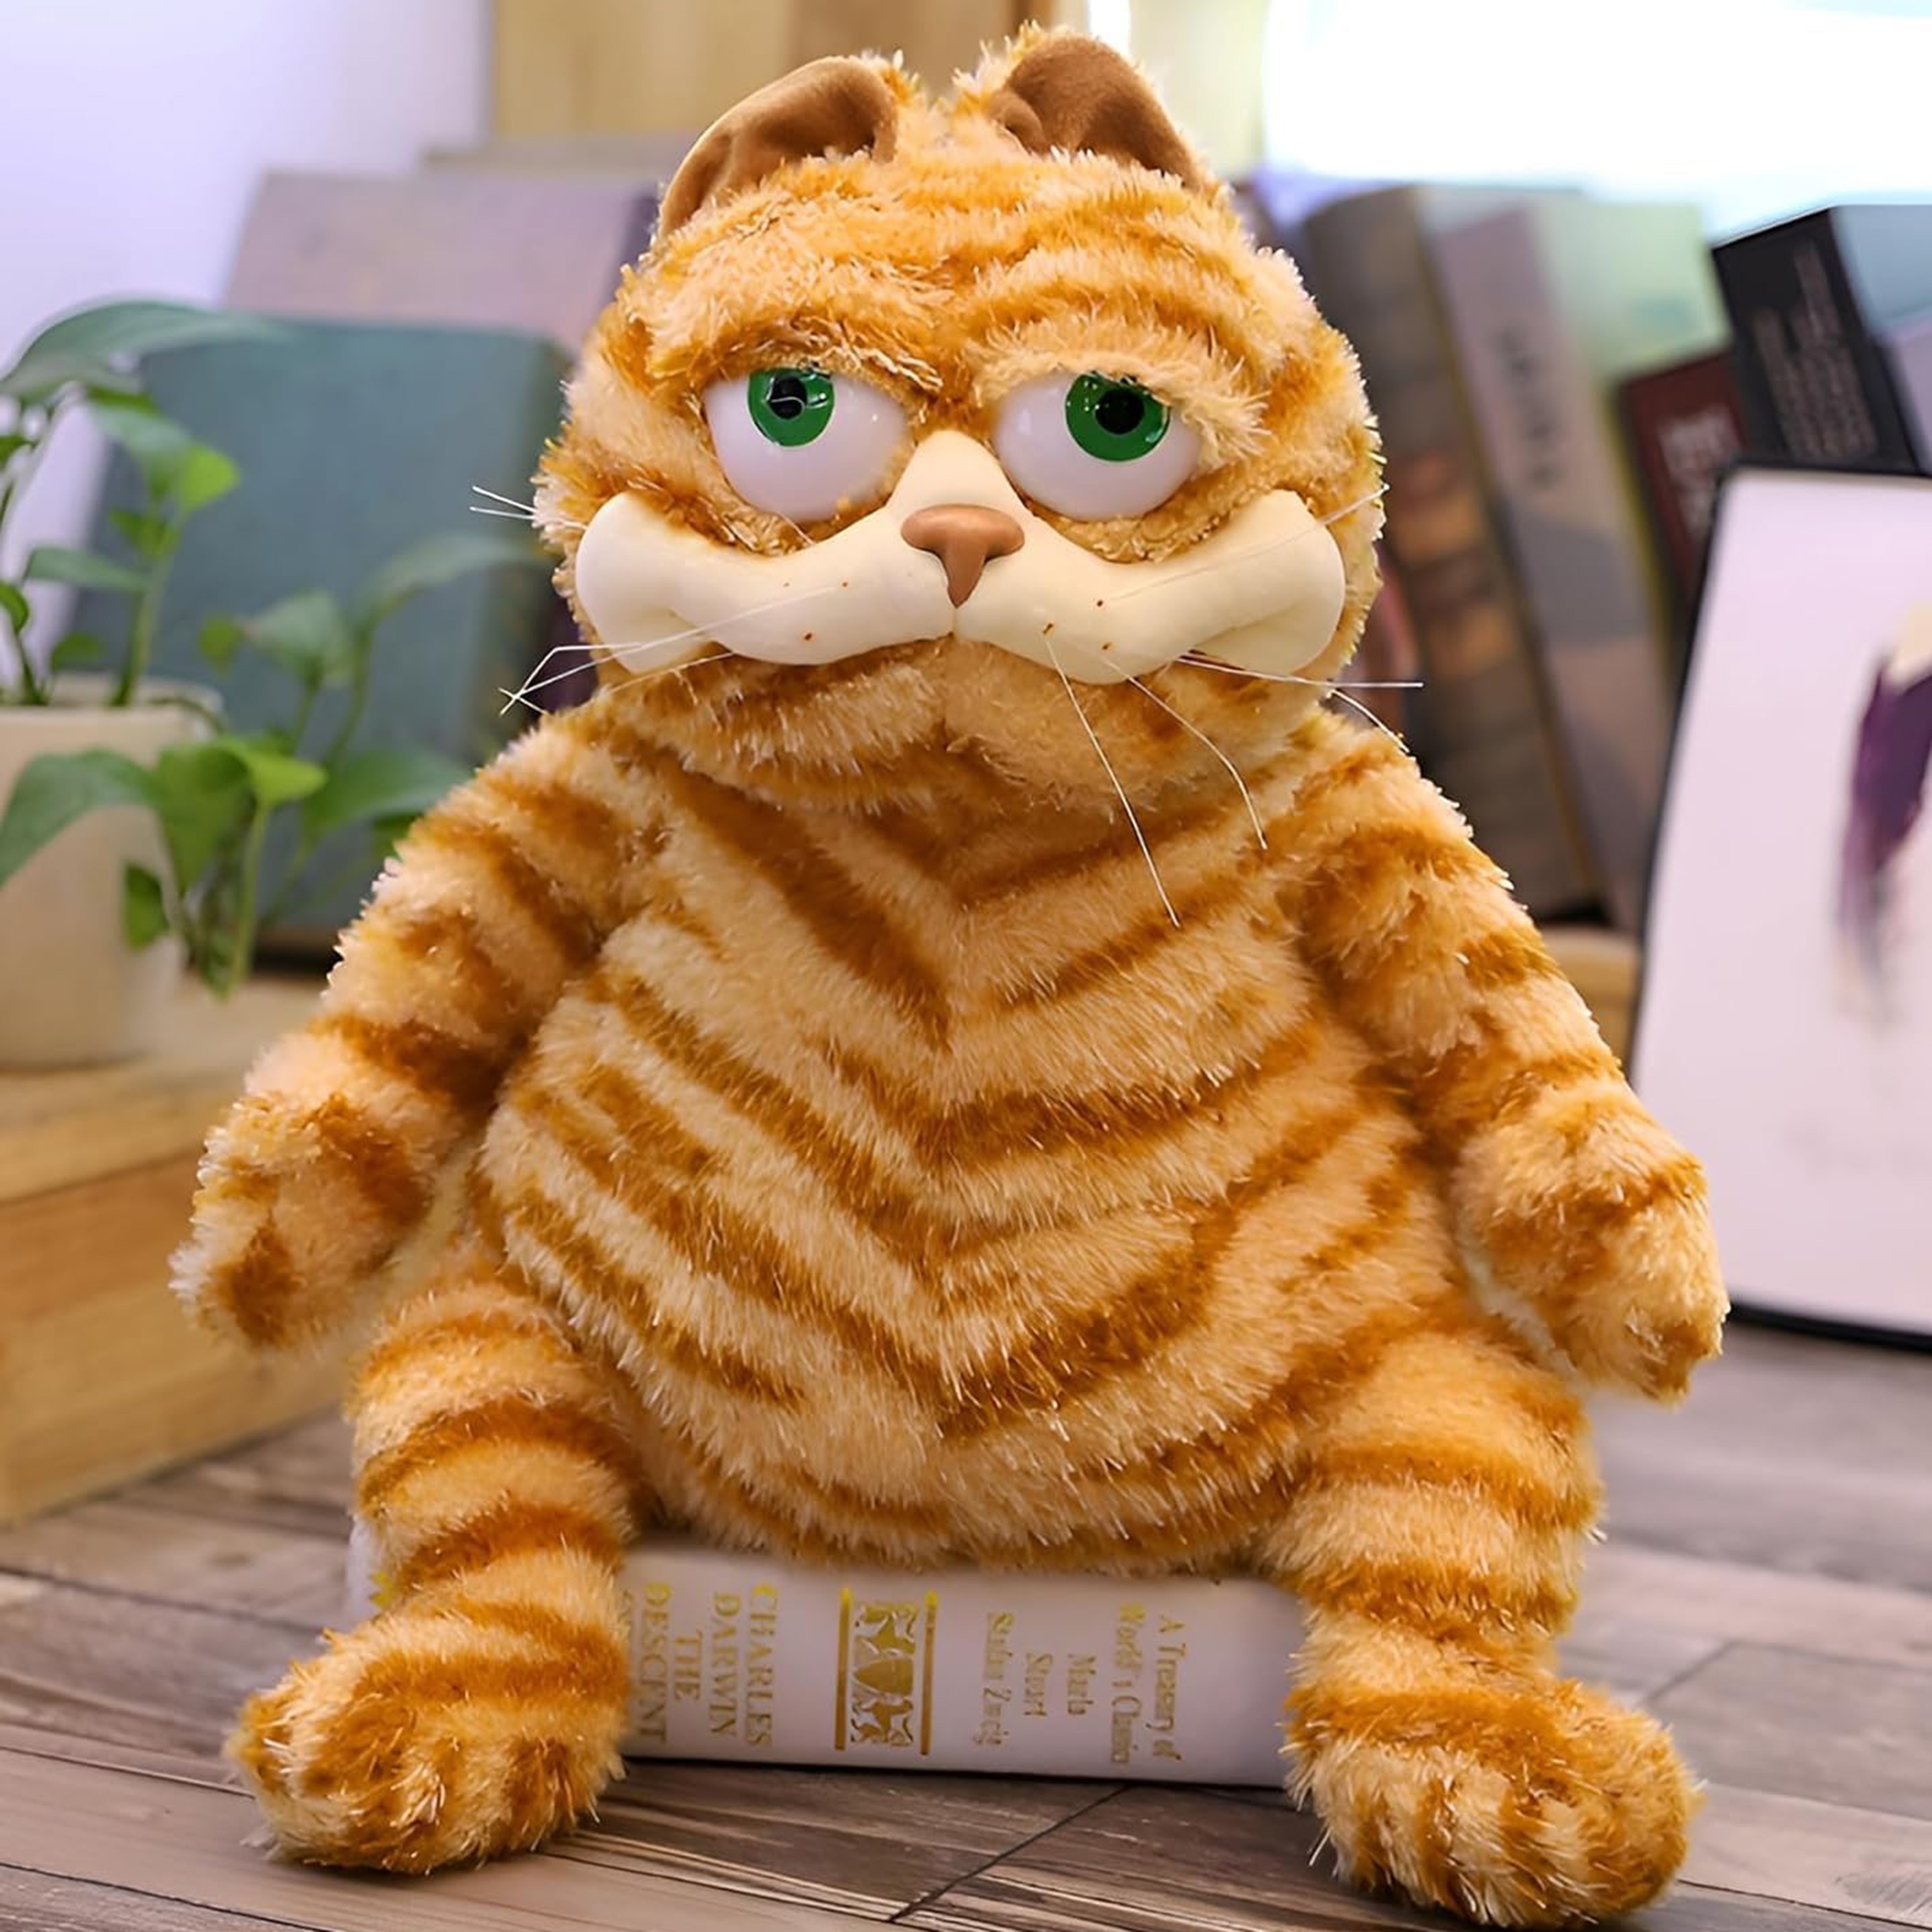 

30cm/11.8in Fat Orange Plush Cat Stuffed Animals Toy, Lifelike Yellow Tabby Cat Kitty Toy, Snuggly Soft Funny Looking Cat Toy For Xmas Birthday Gift